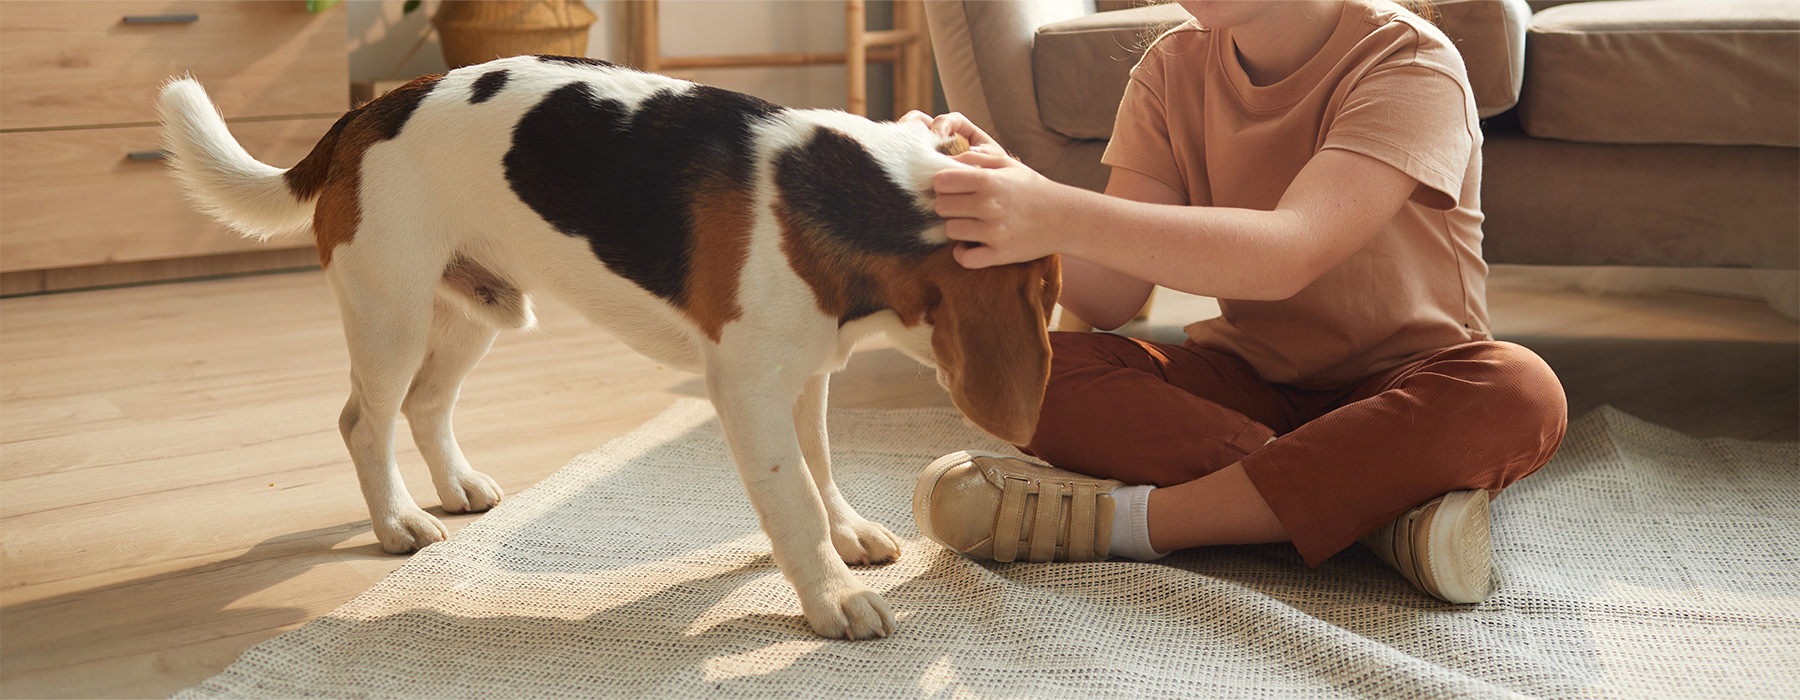 a boy petting his dog in a bright living room